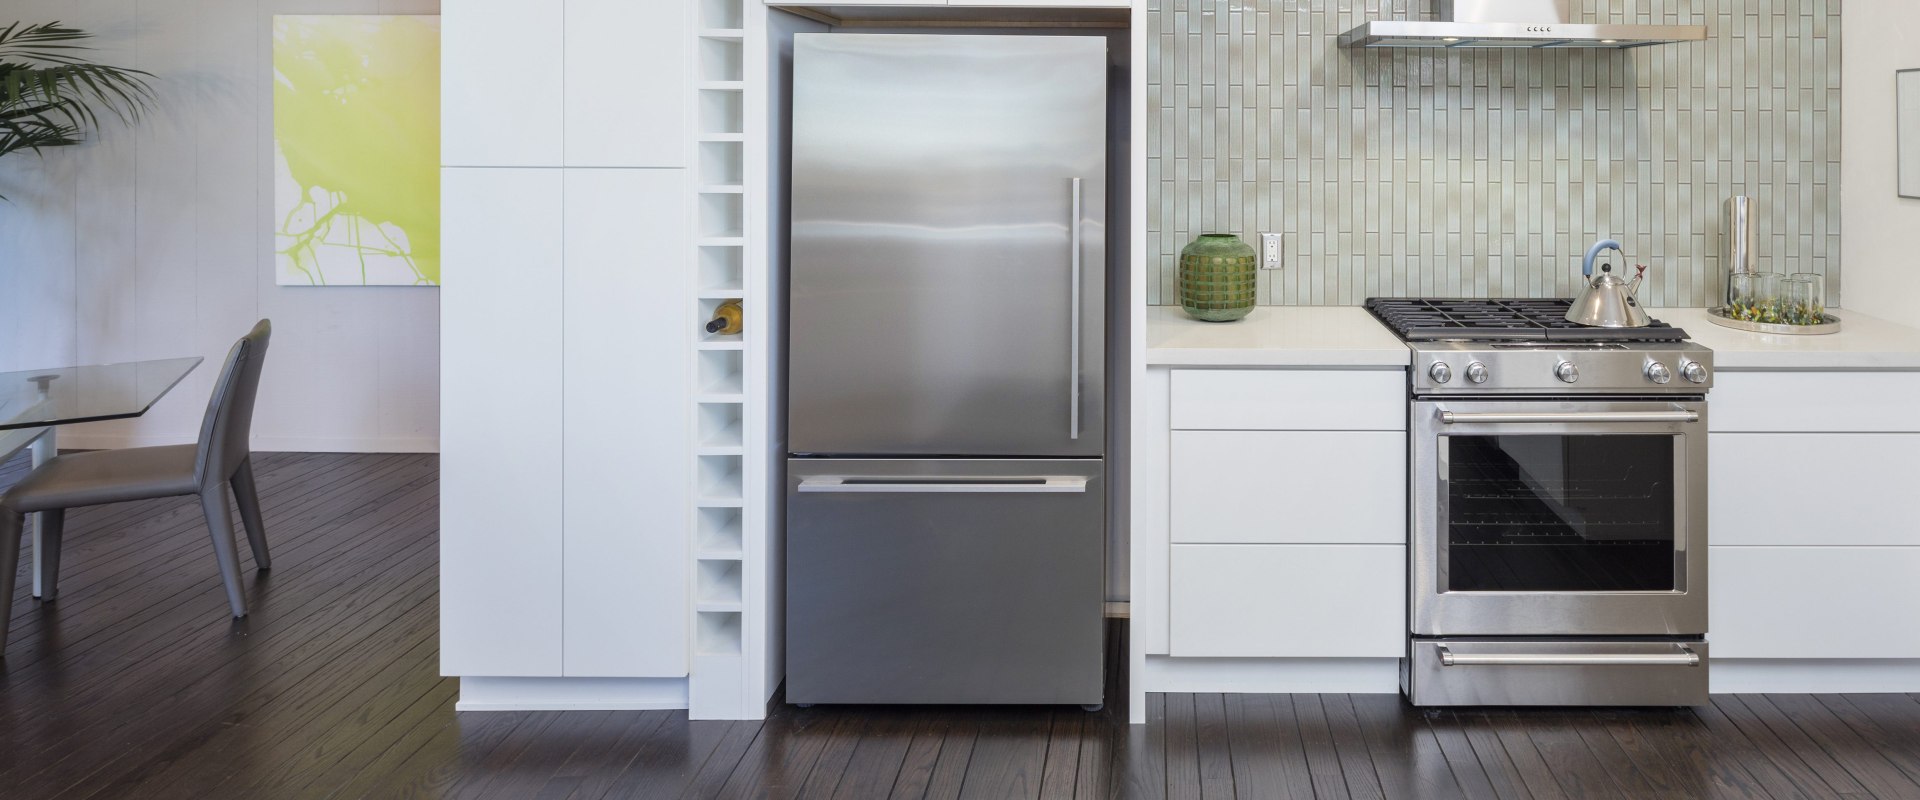 Is Your Refrigerator on the Fritz? 6 Signs It's Time to Call a Professional